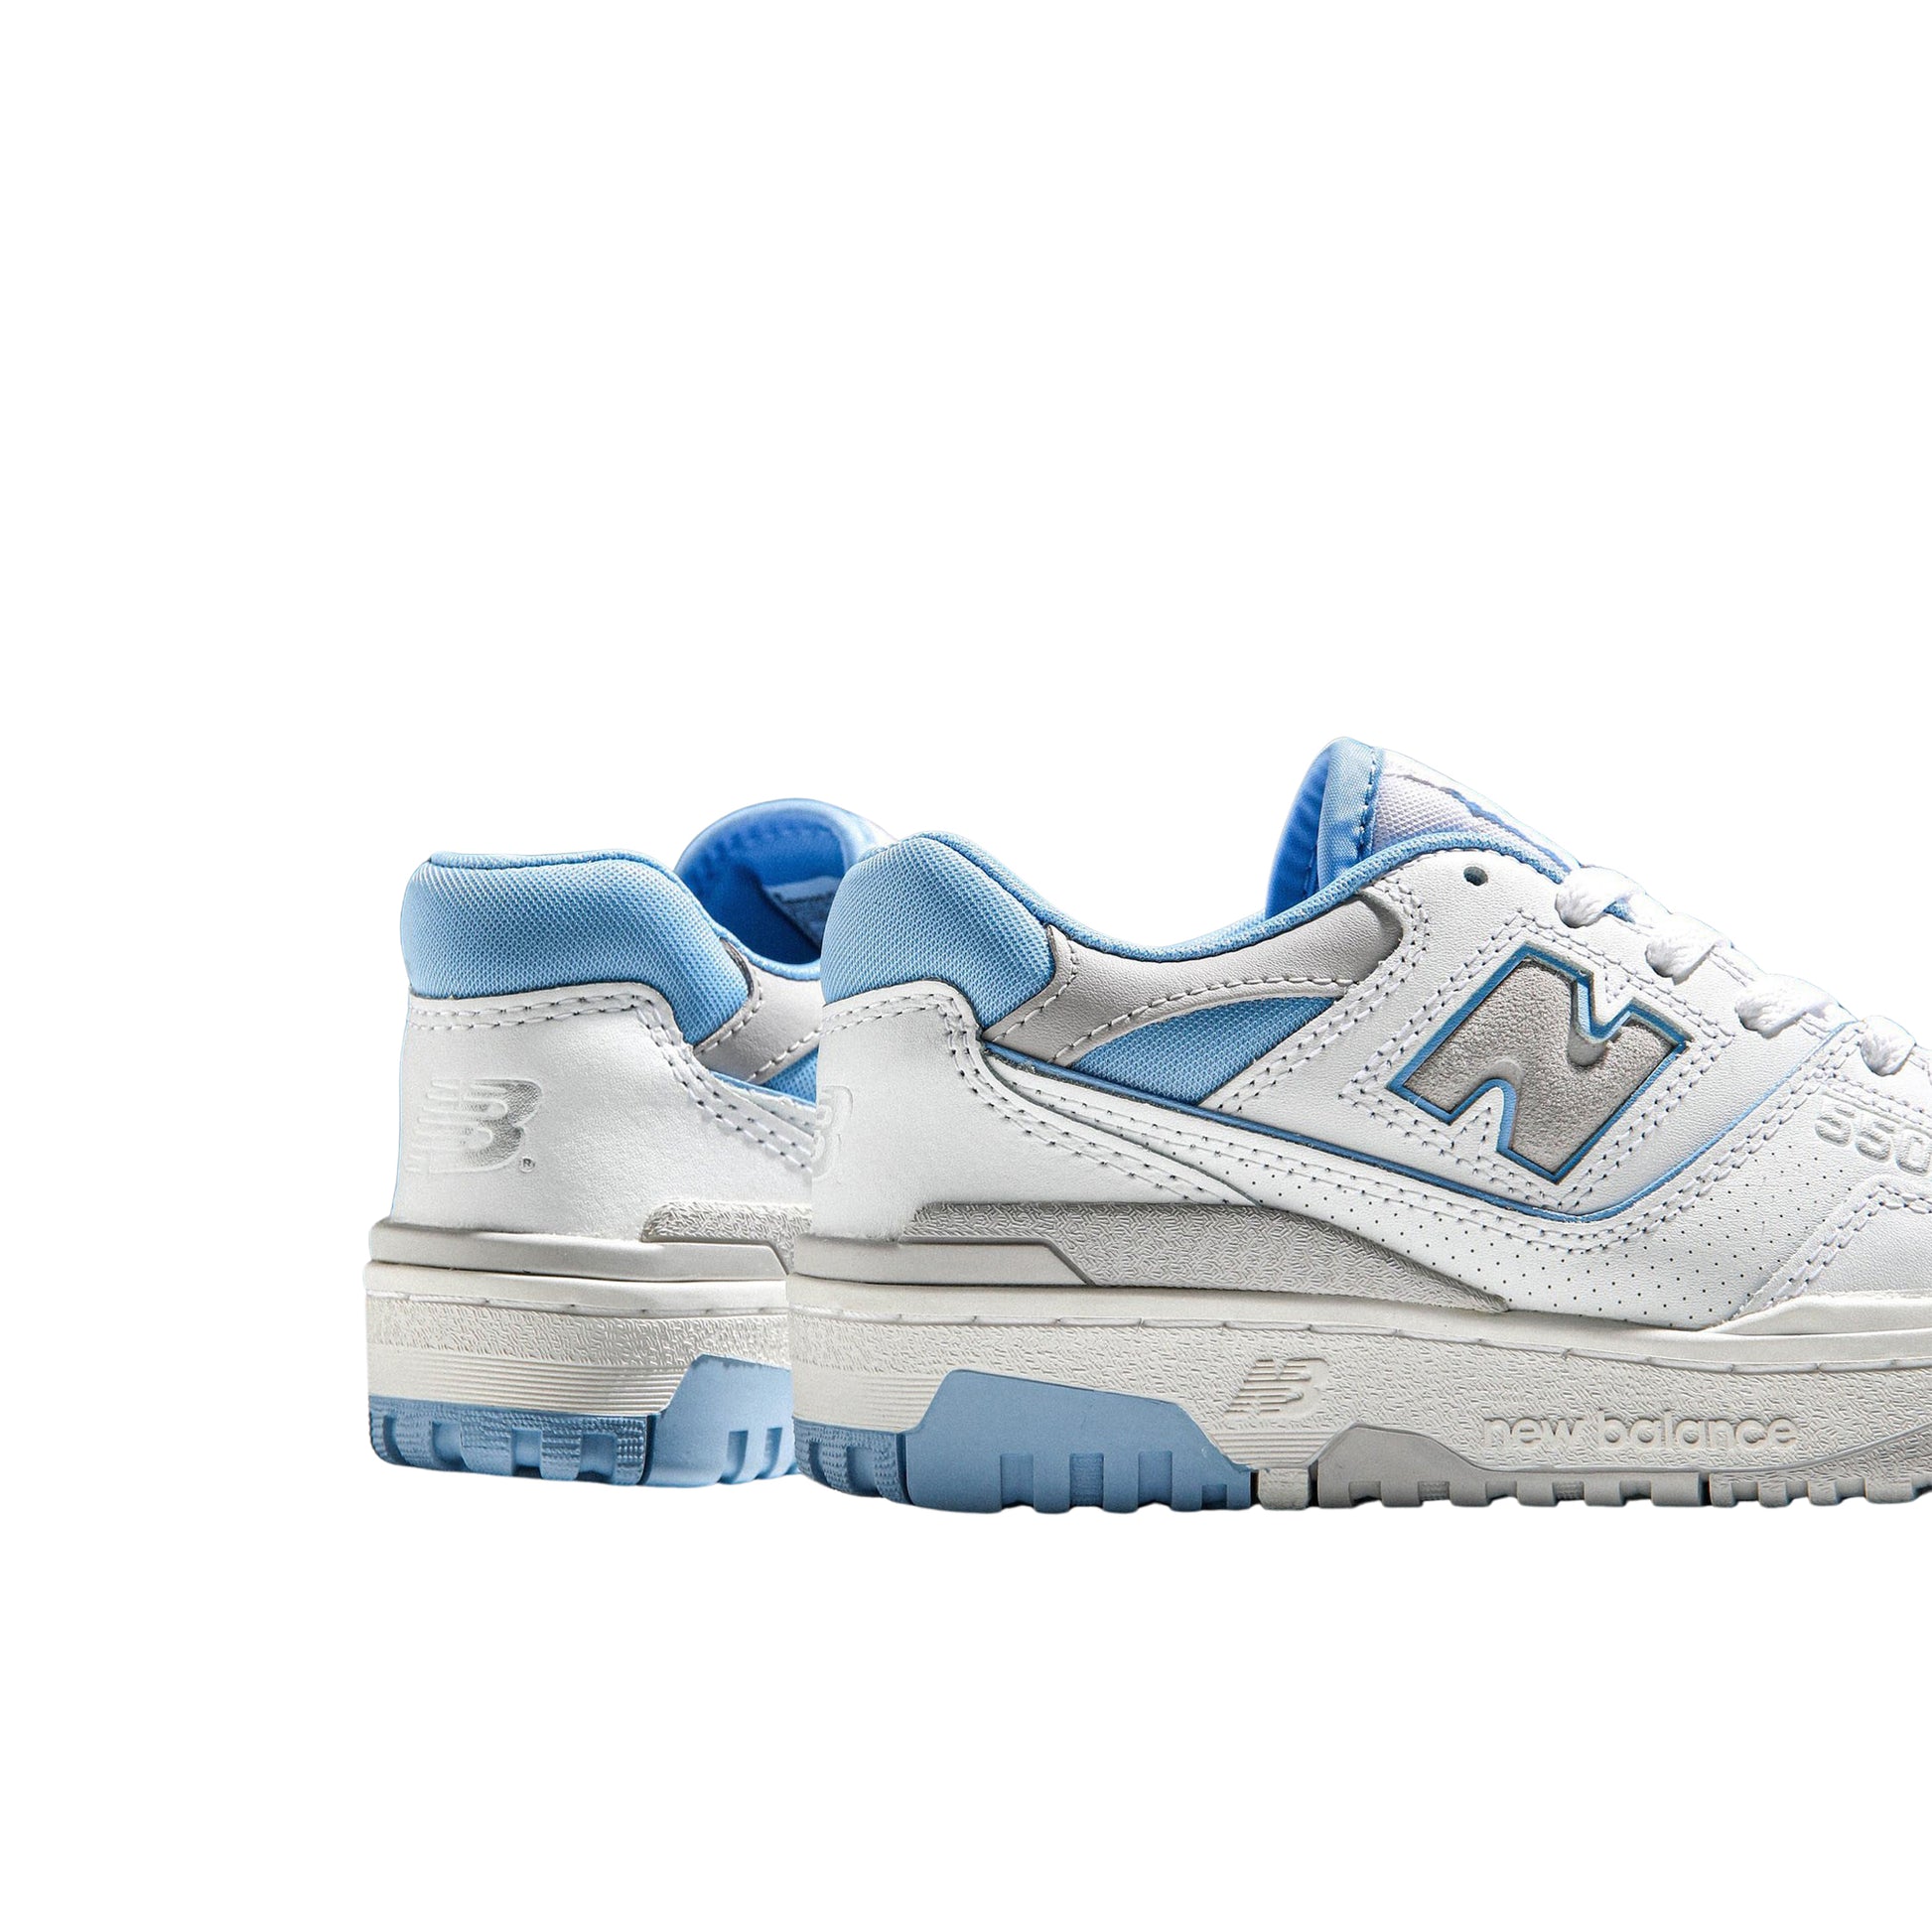 New Balance 550 trainers in white and blue